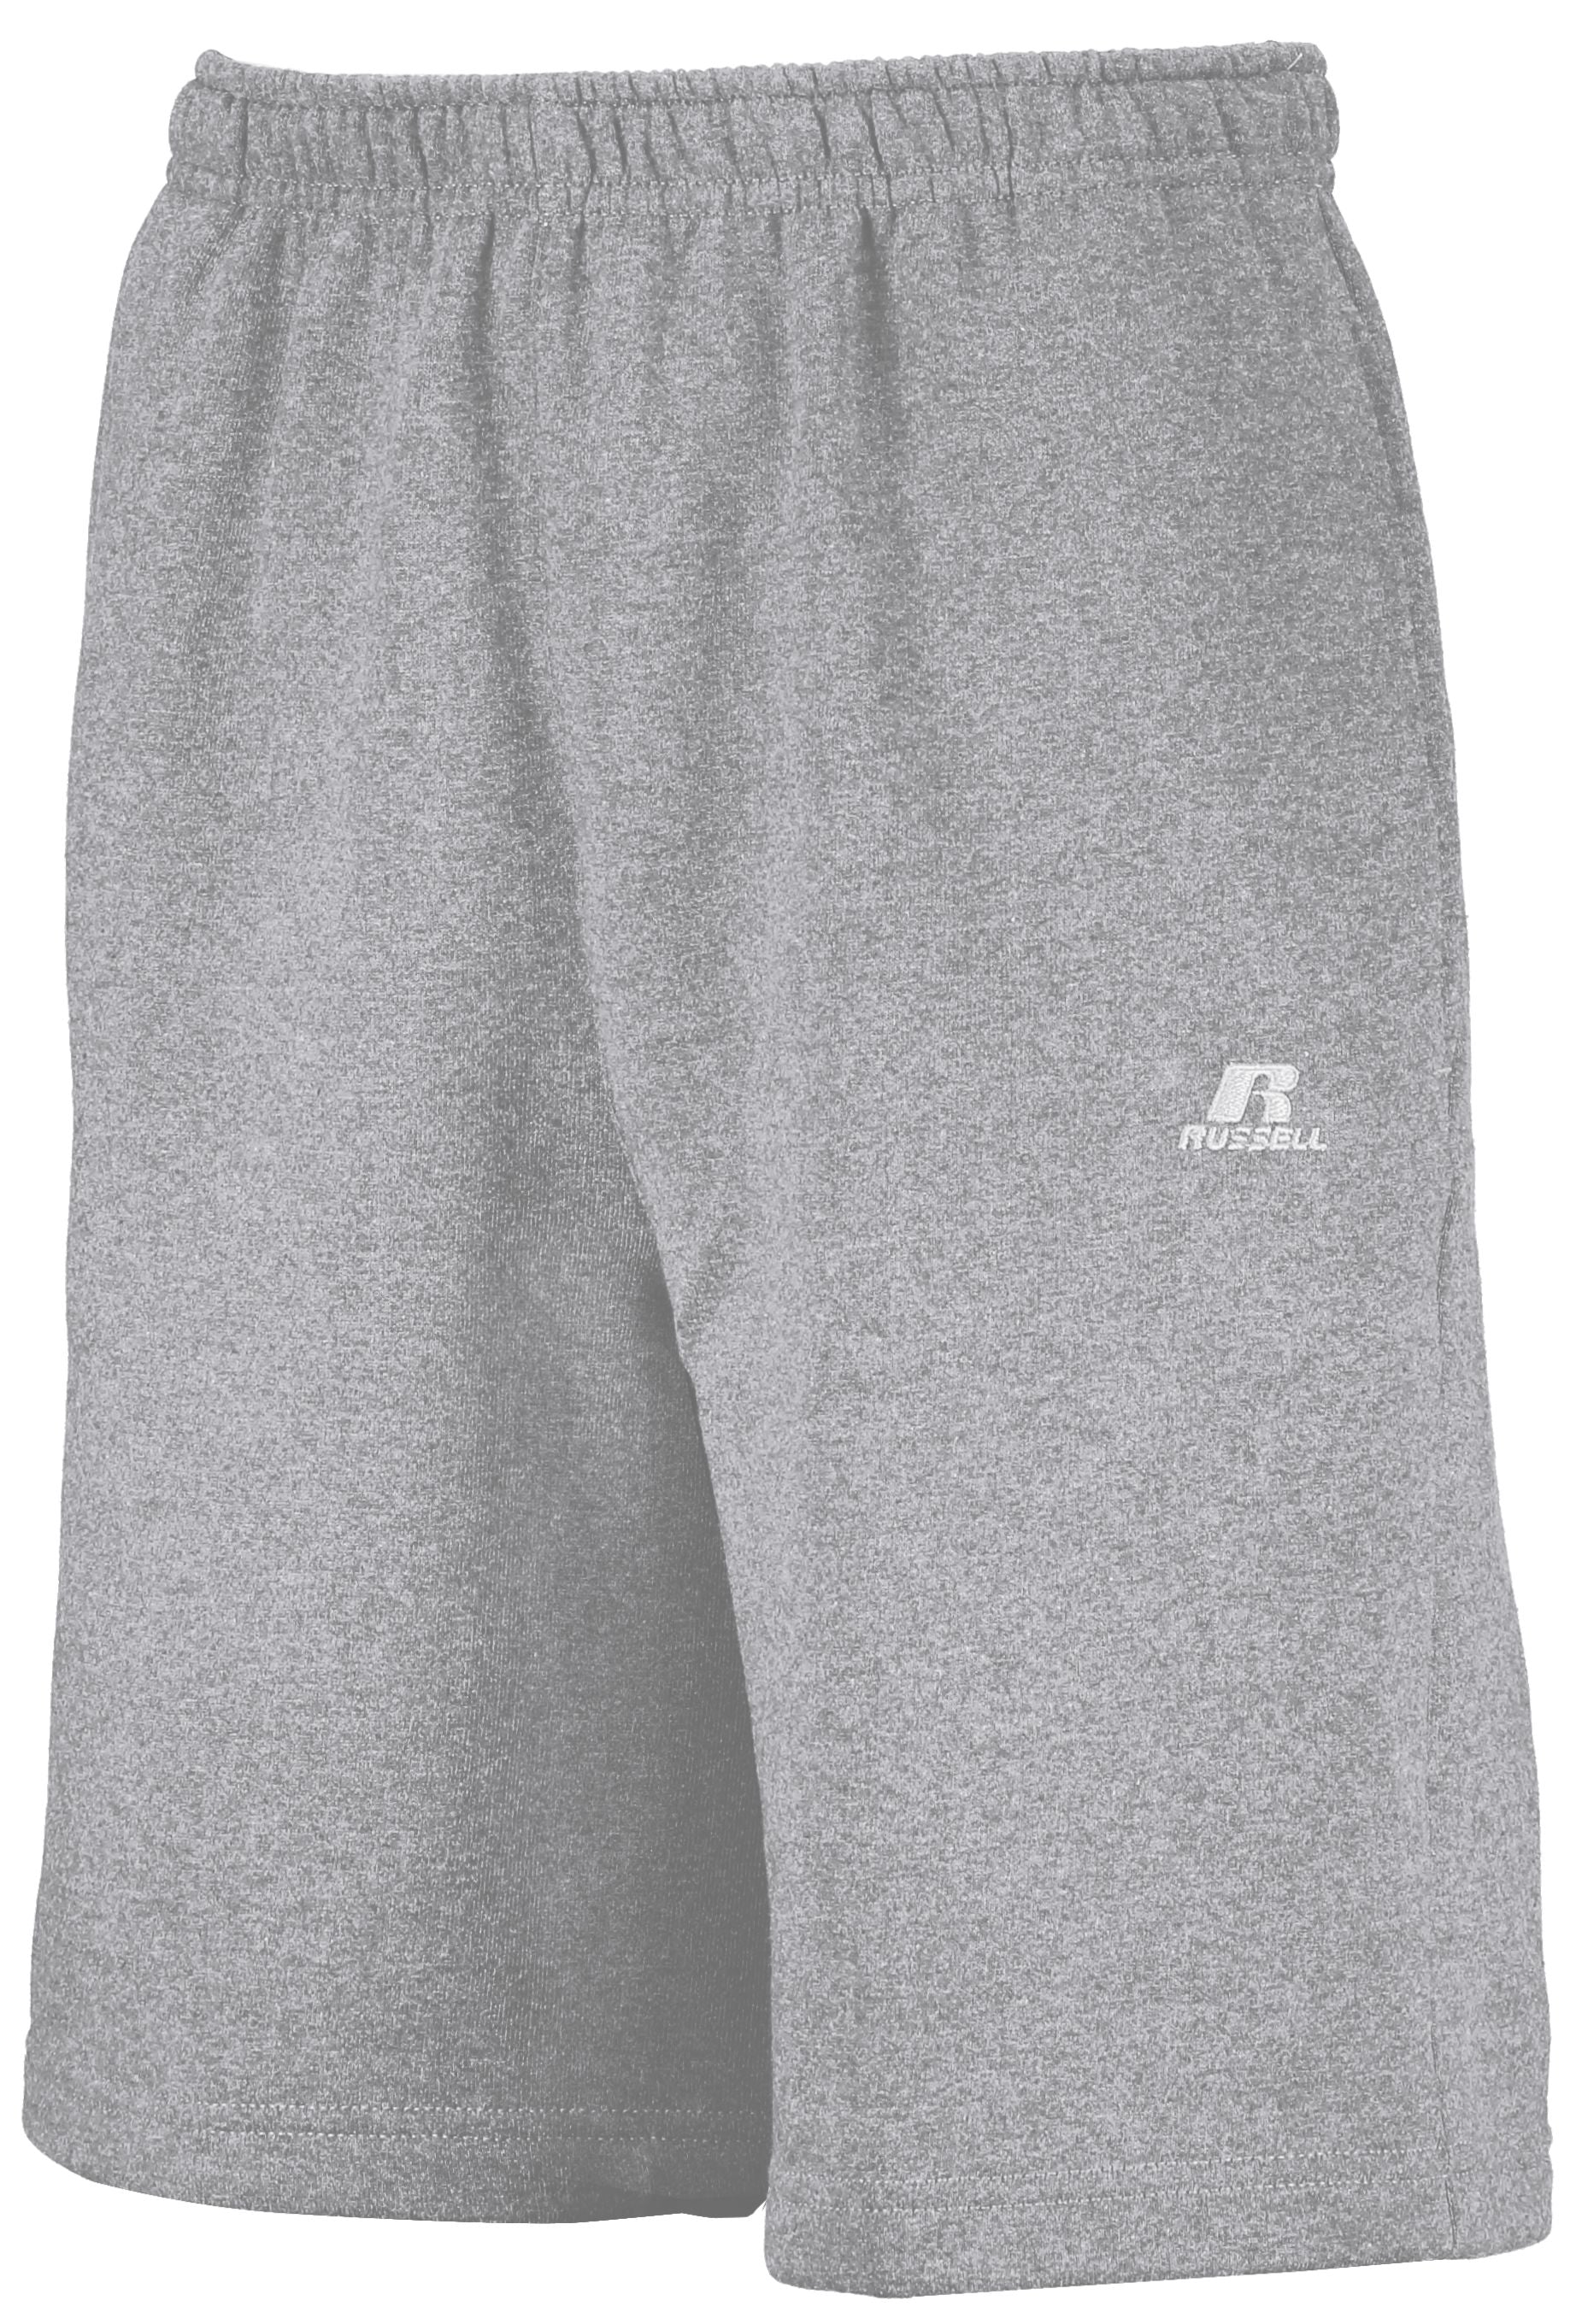 Russell Athletic Dri-Power Fleece Training Shorts With Pockets in Oxford  -Part of the Adult, Adult-Shorts, Russell-Athletic-Products product lines at KanaleyCreations.com